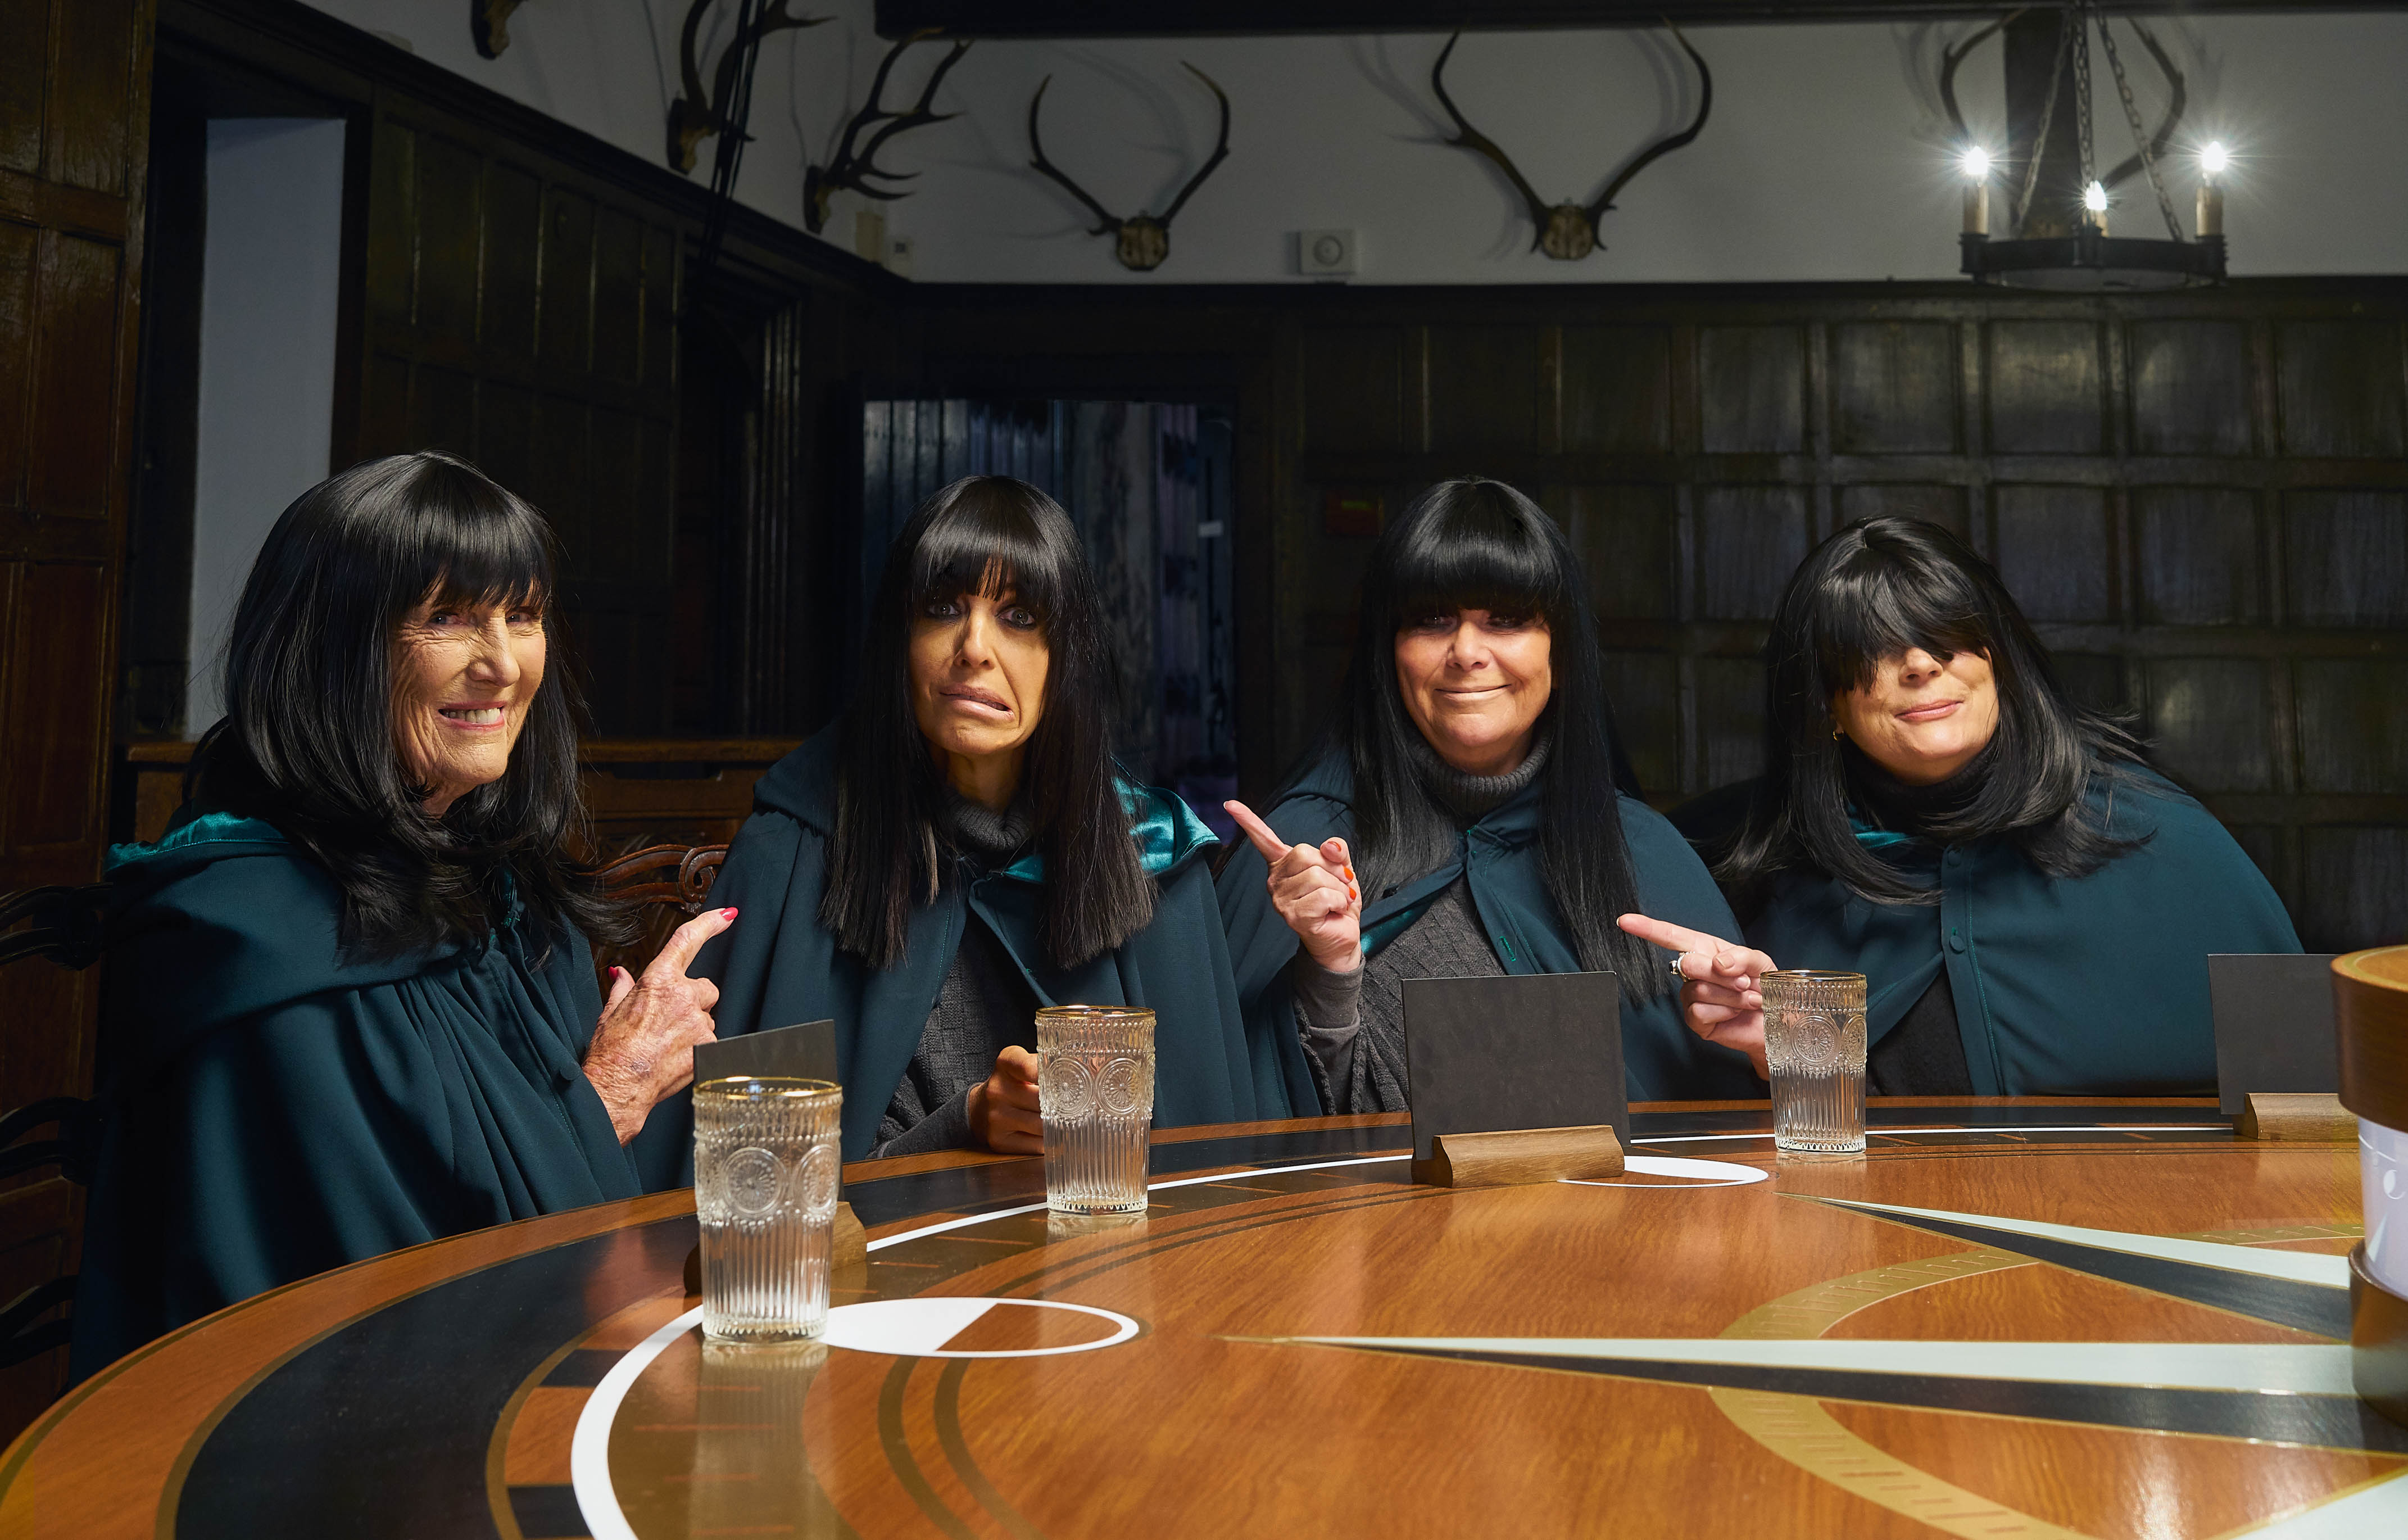 Mary Berry, Claudia Winkleman, Dawn French and Jennifer Saunders sit around The Traitors roundtable. All of them are wearing black Traitor cloaks, and Mary, Dawn and Jennifer are all wearing black wigs with long fringes mimicking Claudia's hairstyle